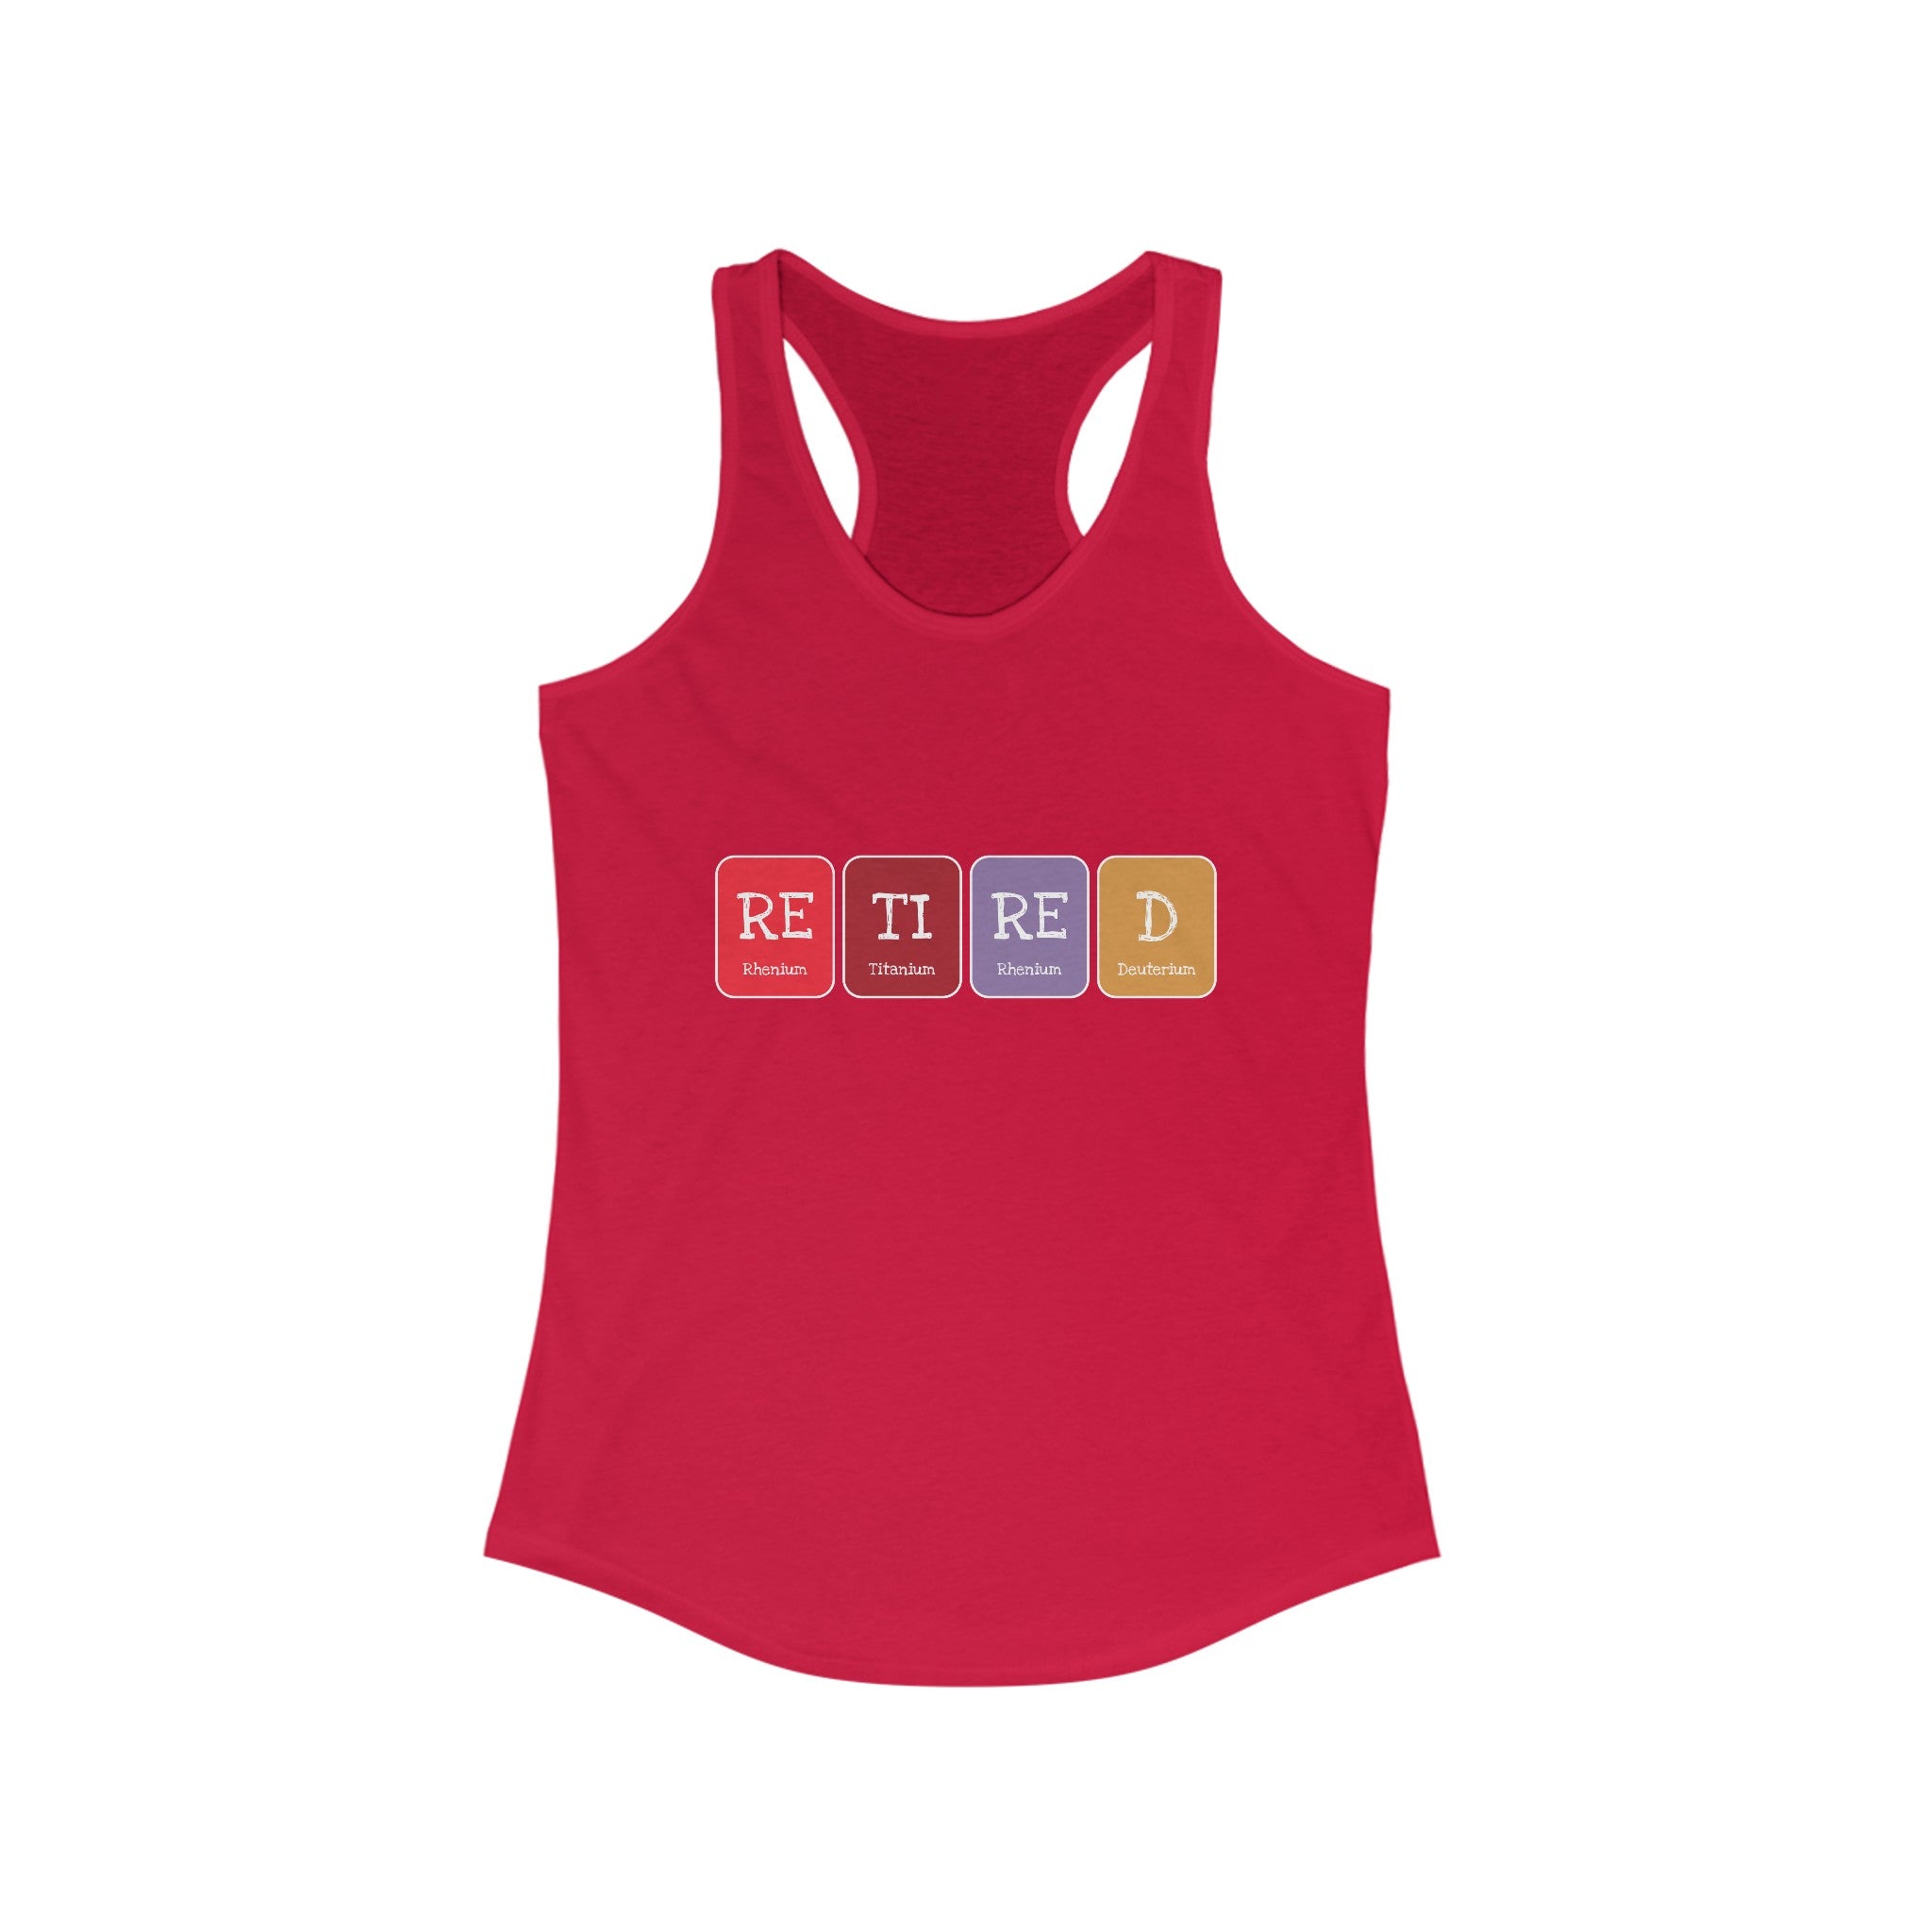 A red, ultra-lightweight Retired - Women's Racerback Tank with a sleek, active style. This sleeveless top features "RETIRED" spelled out using colored periodic table elements on the front, merging both comfort and unique flair.